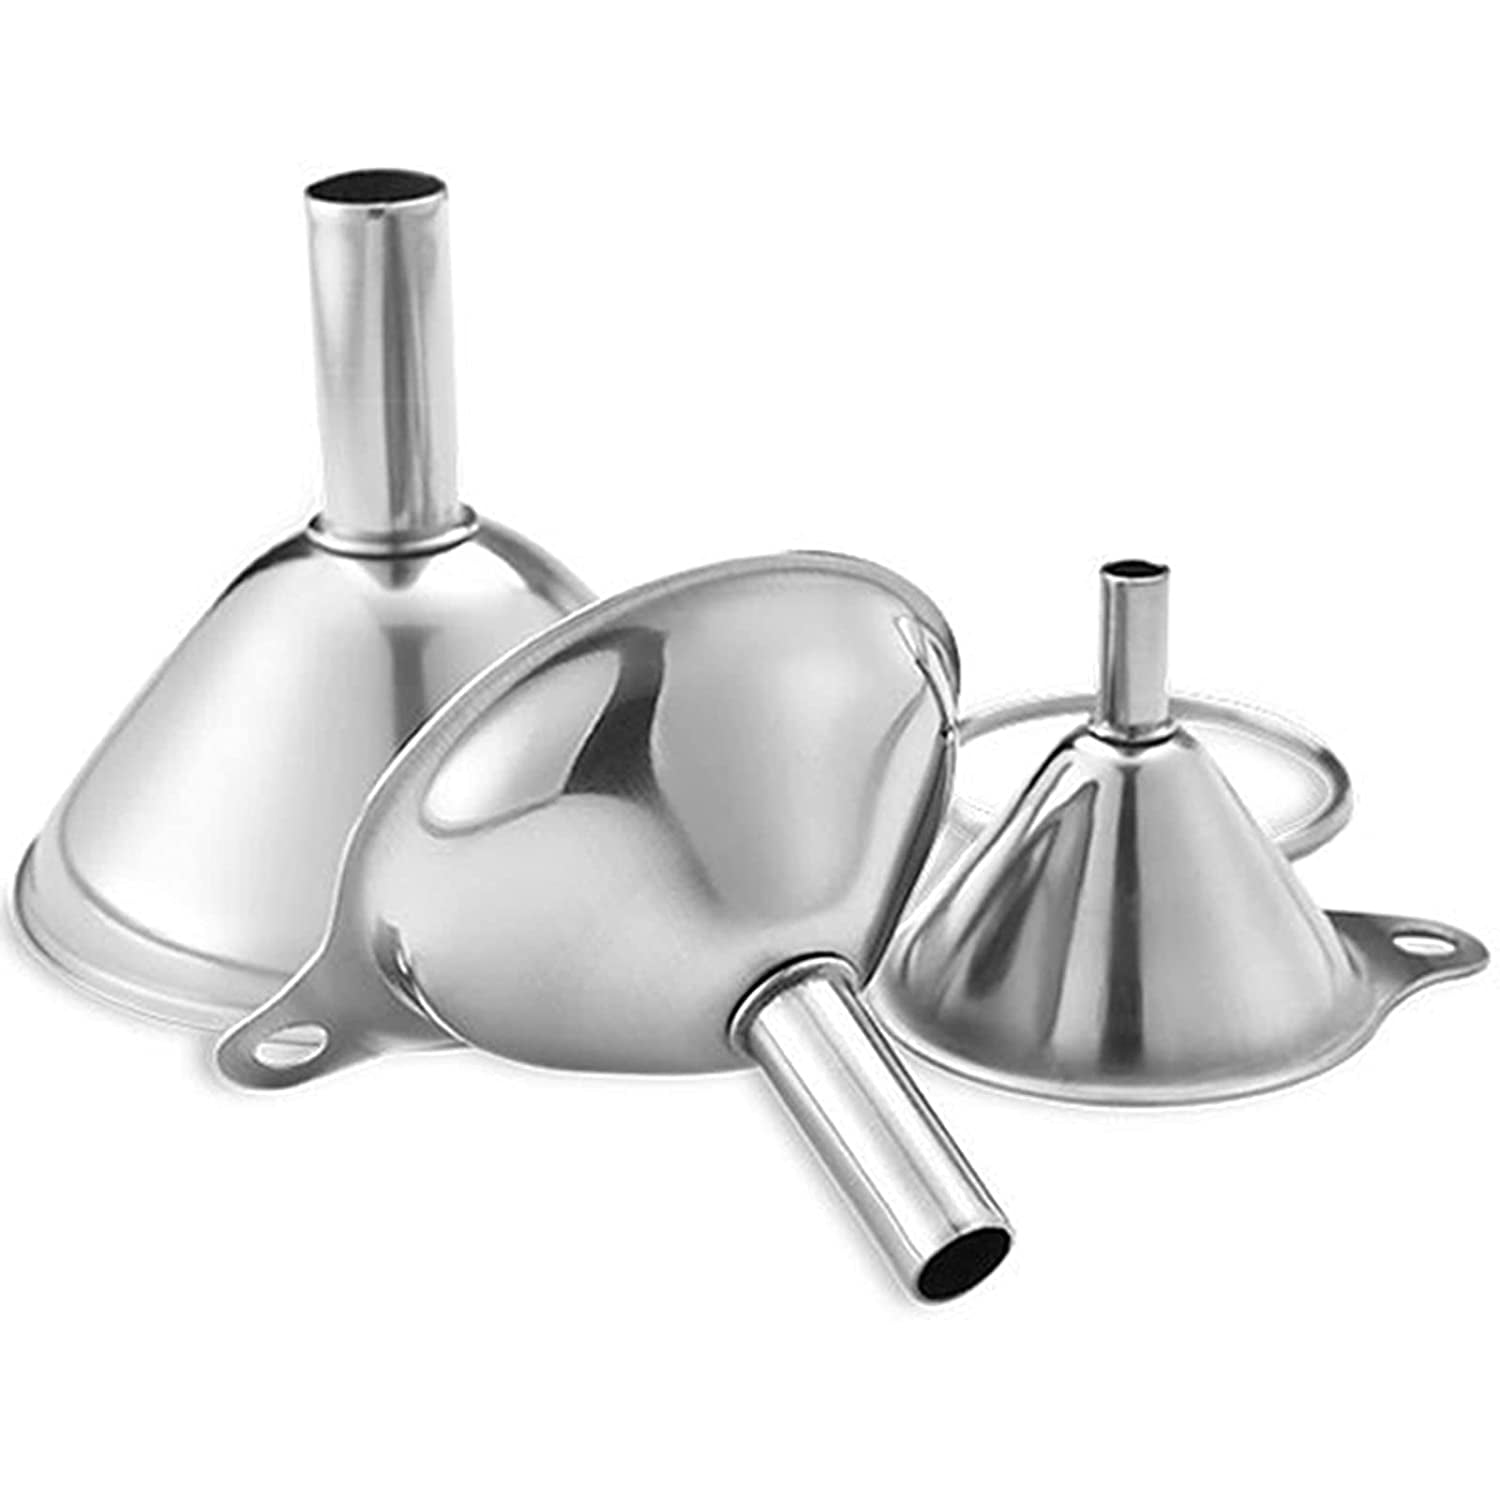 Ludlz Kitchen Funnel, Funnels for Filling Bottles, Set of 3 Stainless Steel  Funnels for Kitchen Use, Small Funnels for Filling Small Bottles To  Transfer Liquid and Dry Ingredients, Oil and Spices 